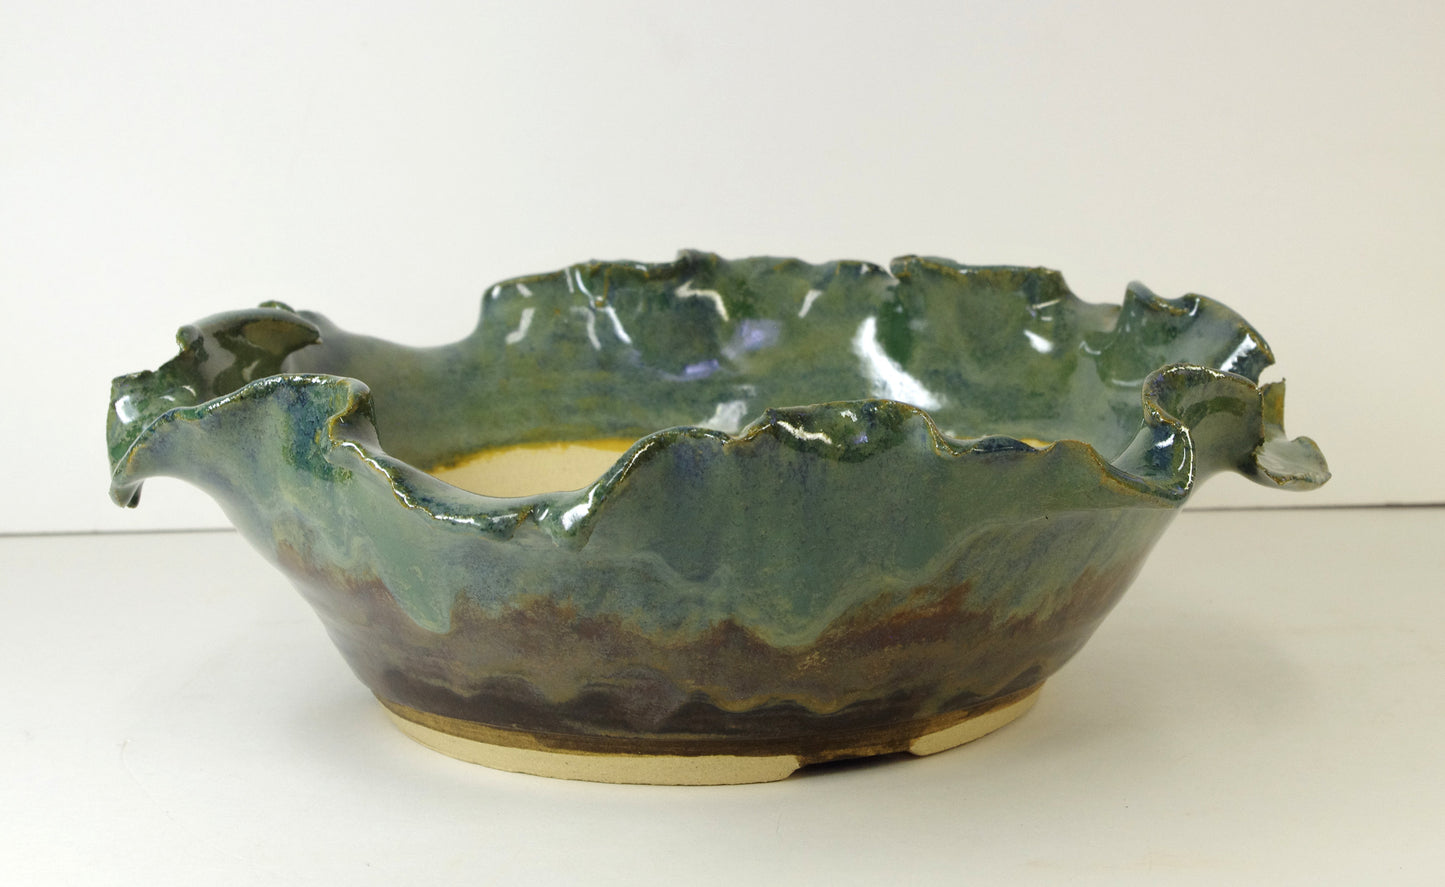 Hand Thrown And Altered Stoneware Bonsai Pot, Blues, Greens, Browns, 9 7/8 to 8 1/4  by  2 1/2 to 3 1/2 tall, With Extra Wire Holes